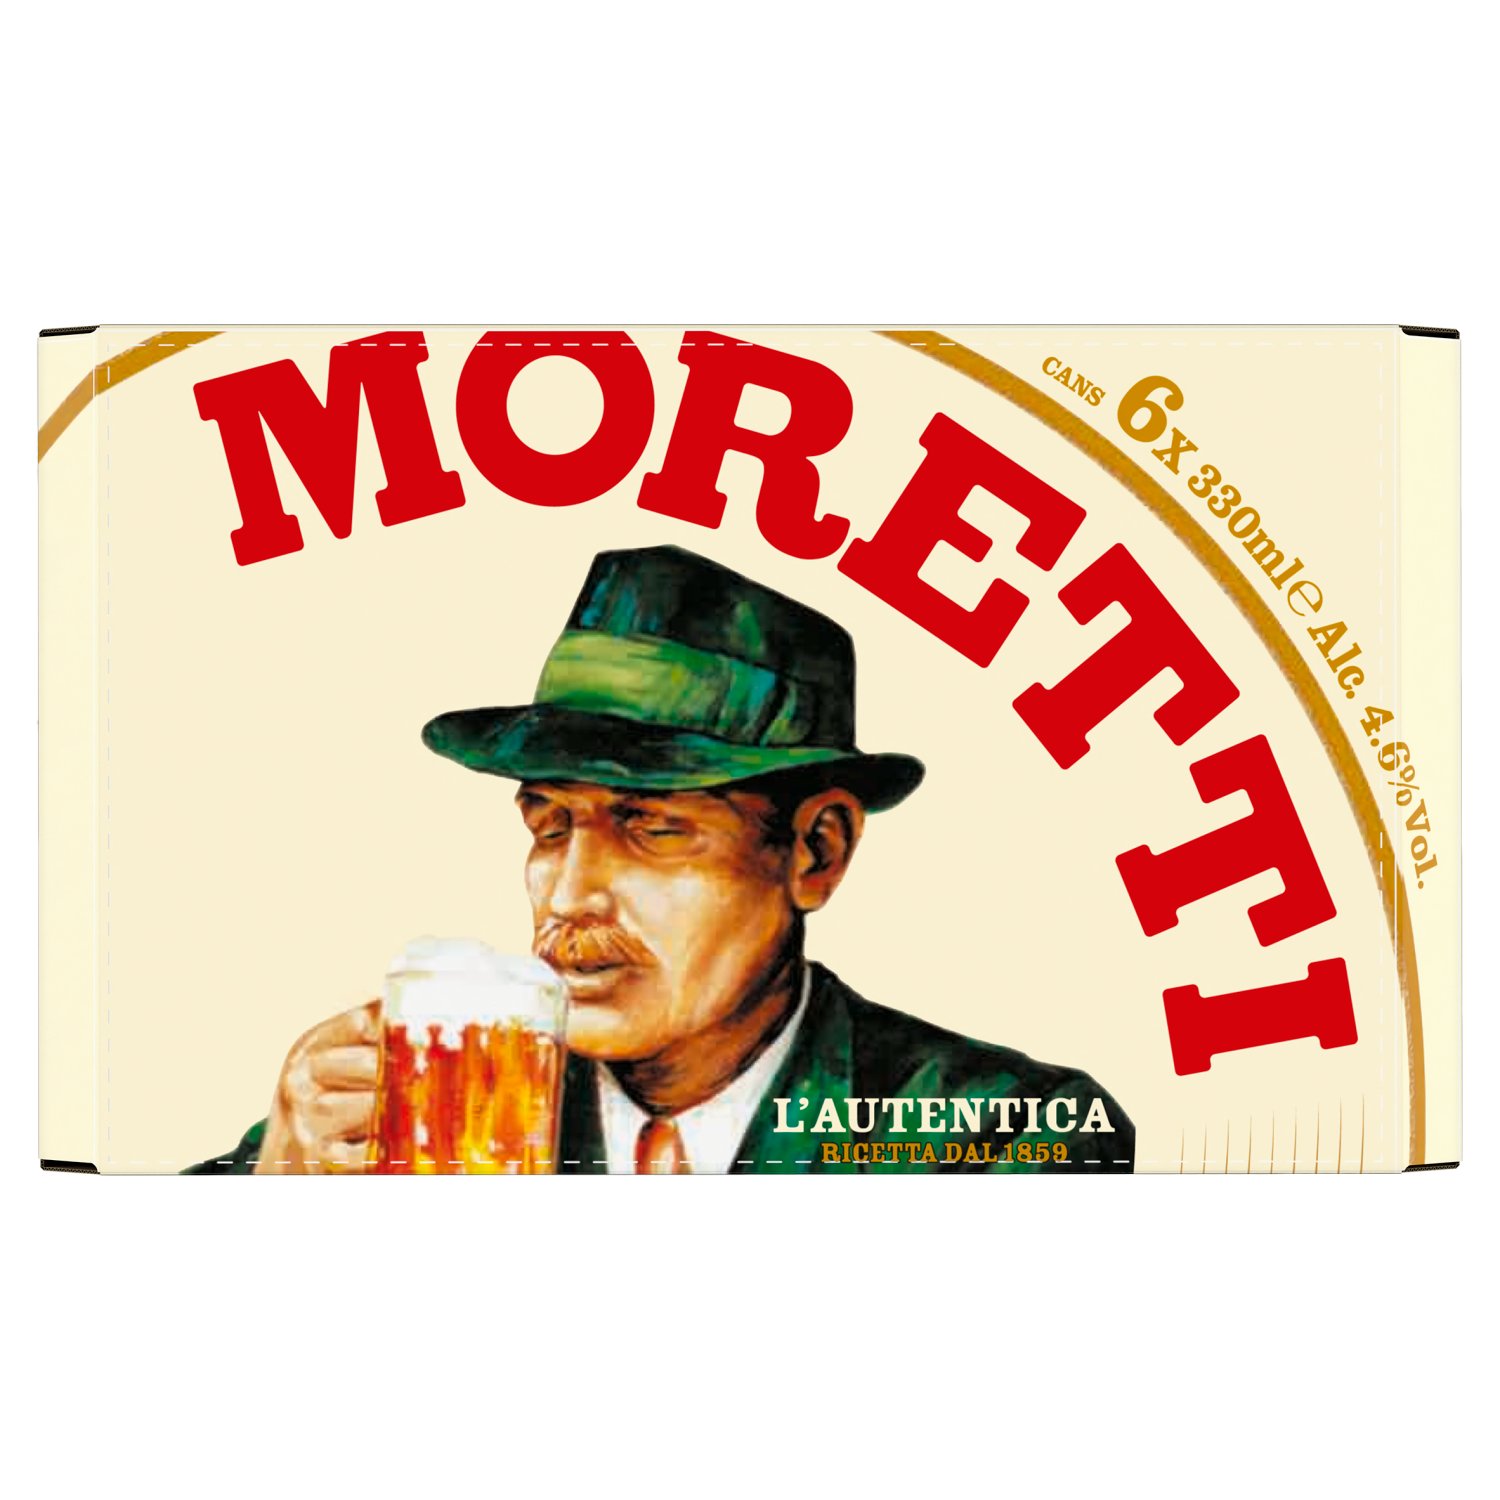 Italy's favourite beer brand, Birra Moretti is the ultimate quality Italian lager brewed to the same original recipe created by Luigi Moretti in 1859. Luigi wanted to brew a beer with quality and craftsmanship - to be enjoyed with great food and great company. Truly life's simple pleasures! Salute!
